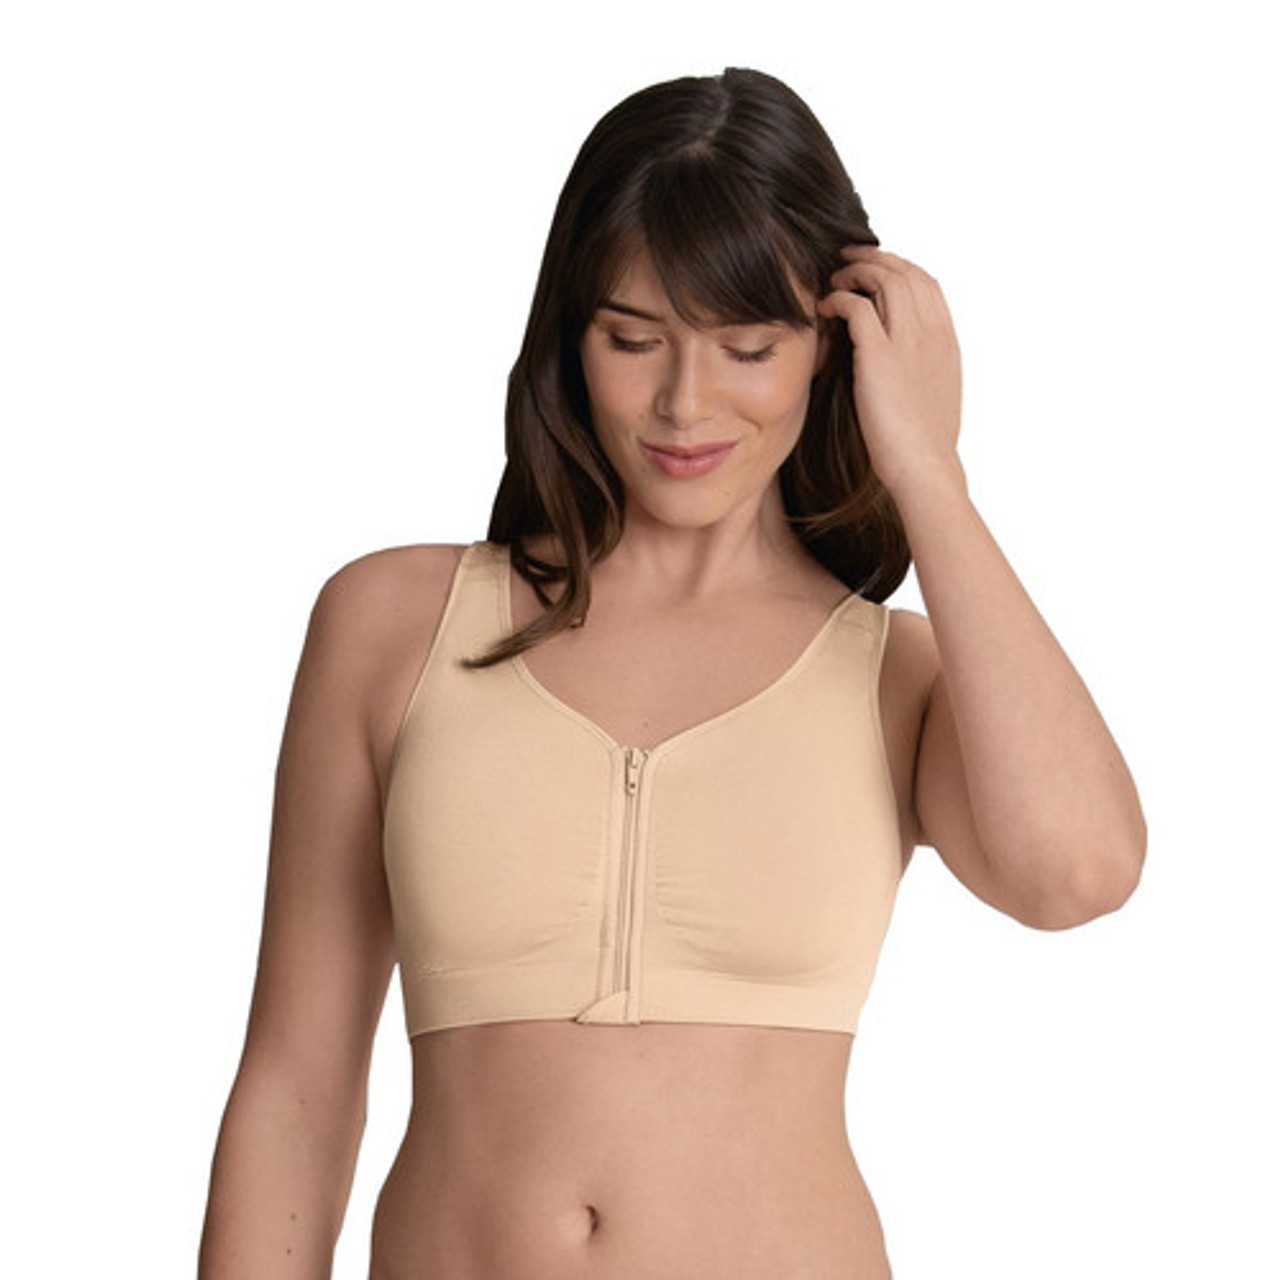 Mazeix India - Michi Circuit Bra  Sporty zip-front closure bra. Soft and  sweat-wicking, it'll keep you cool and comfortable all on its own or  underneath any top! Get yours now! Available